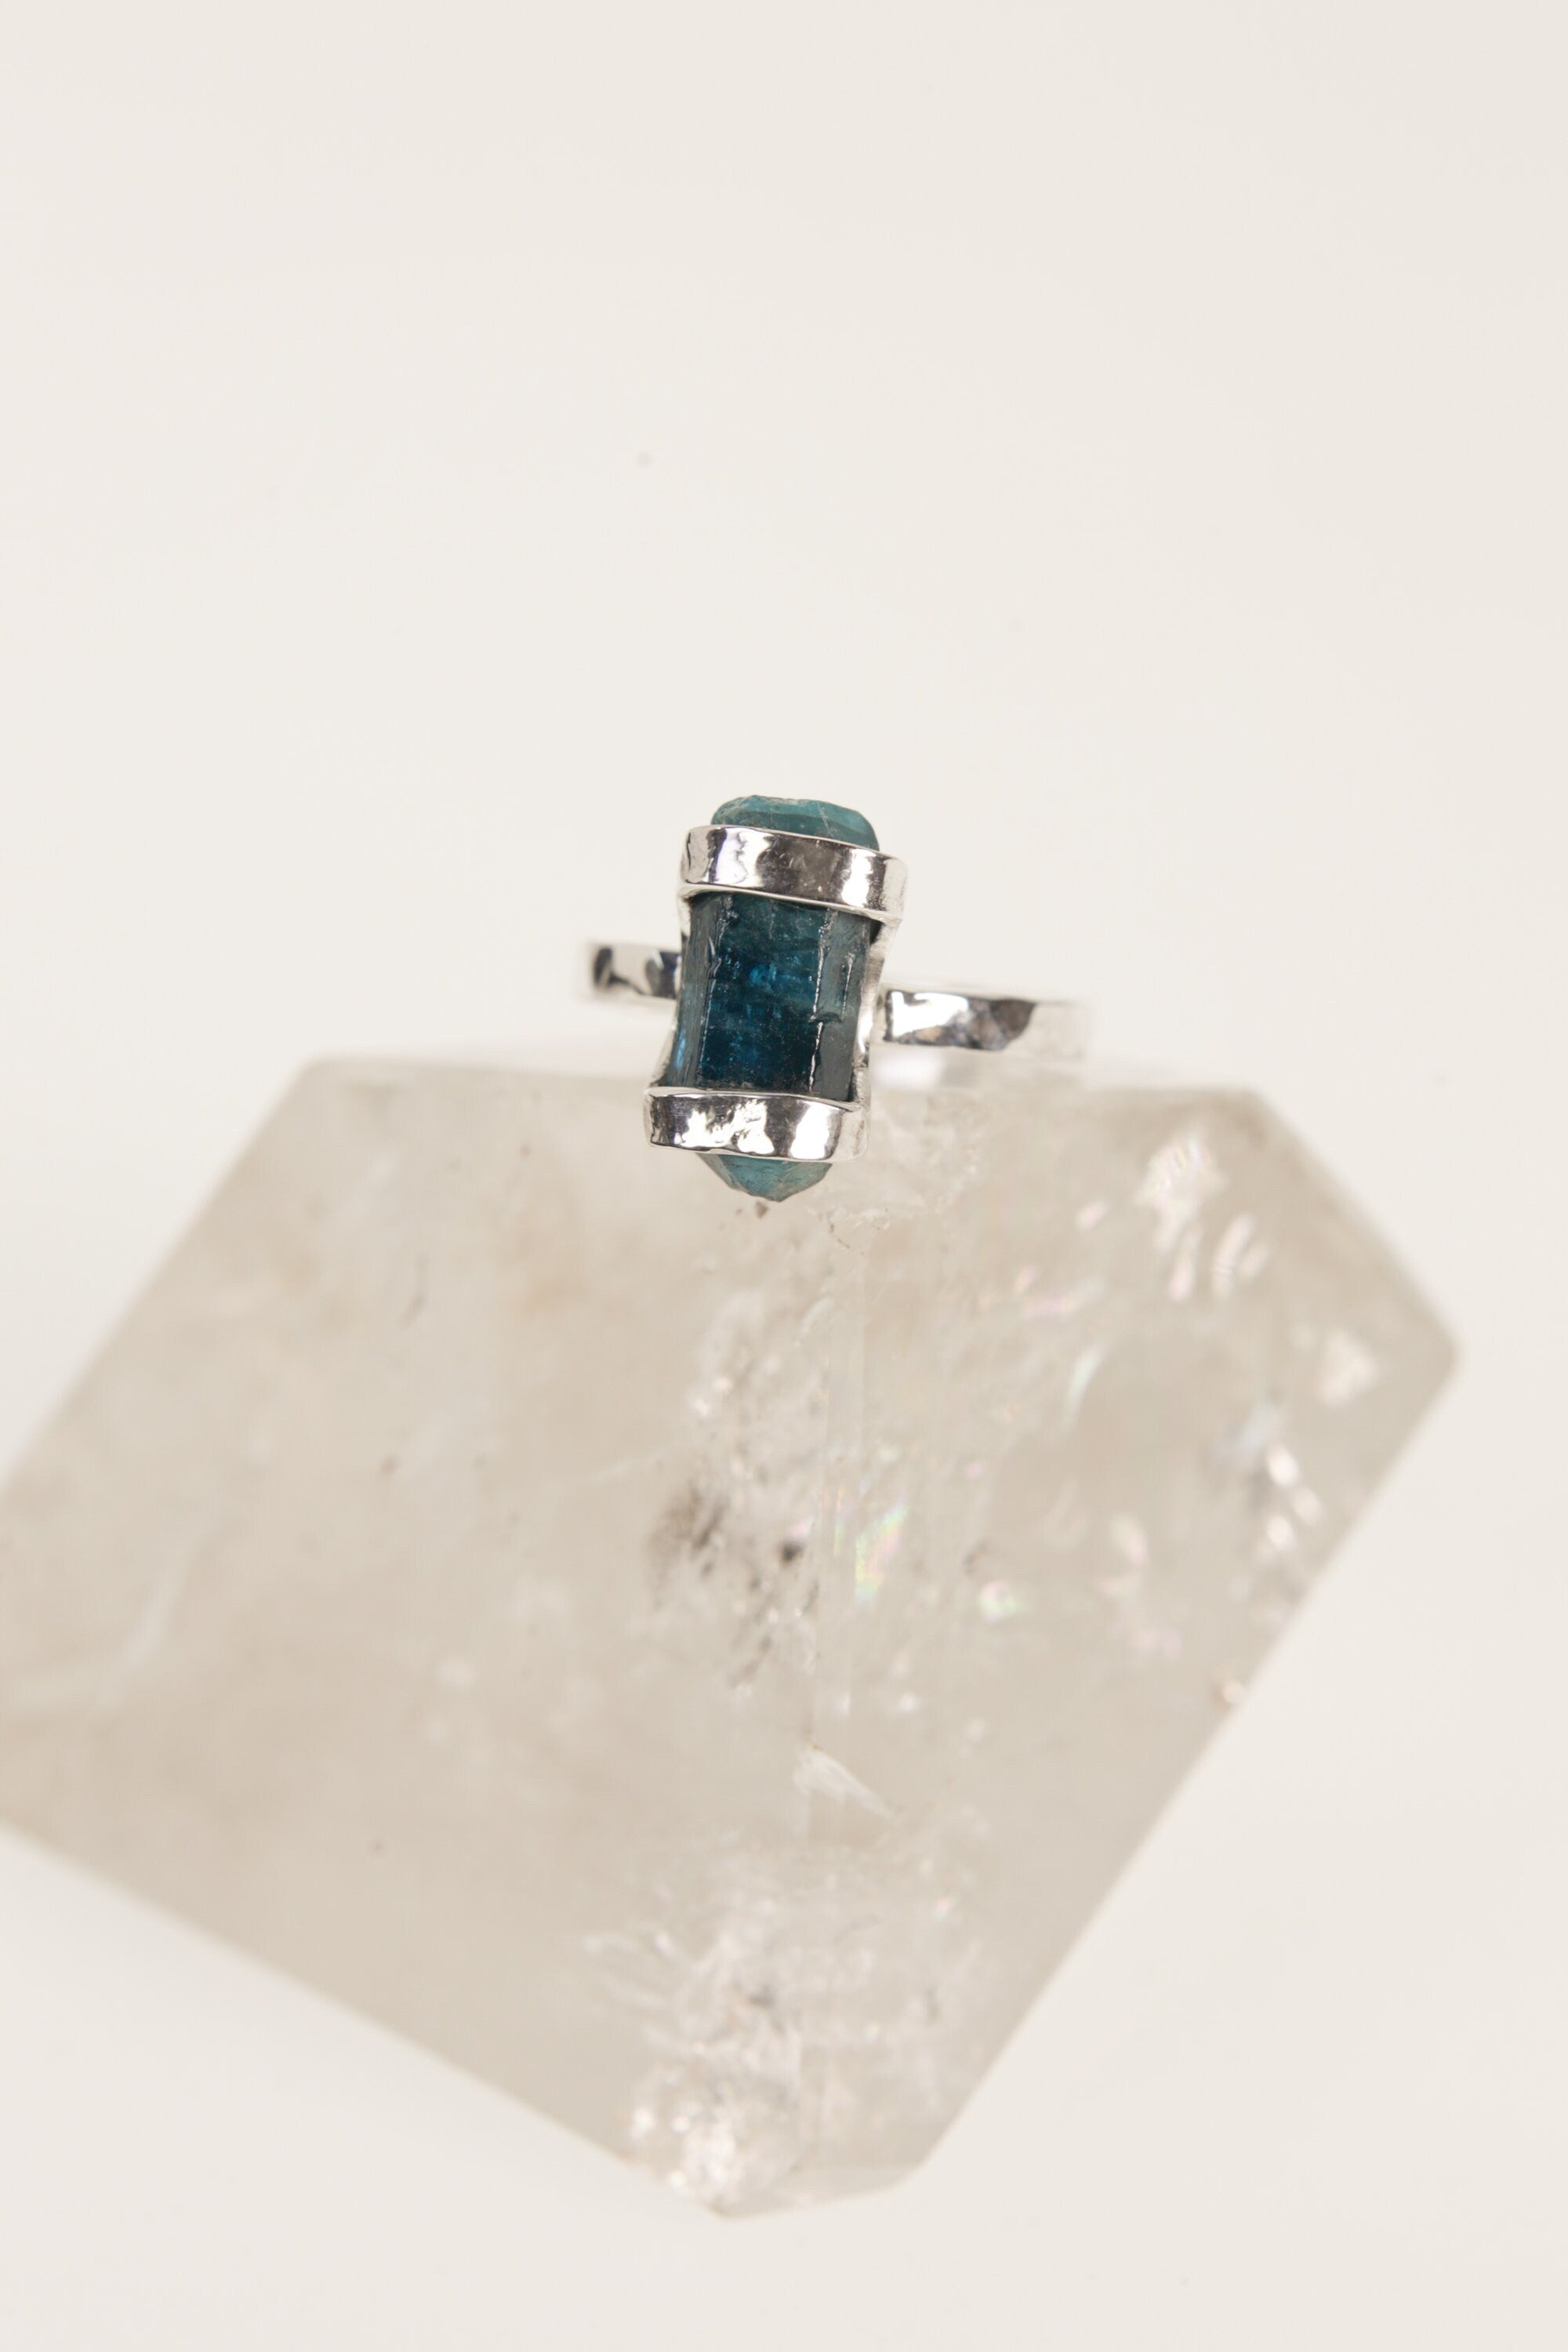 Celestial Blue Terminated Apatite Ring-Hammered & Shiny Finish - Sterling Silver Ring - Size 4 3/4 US